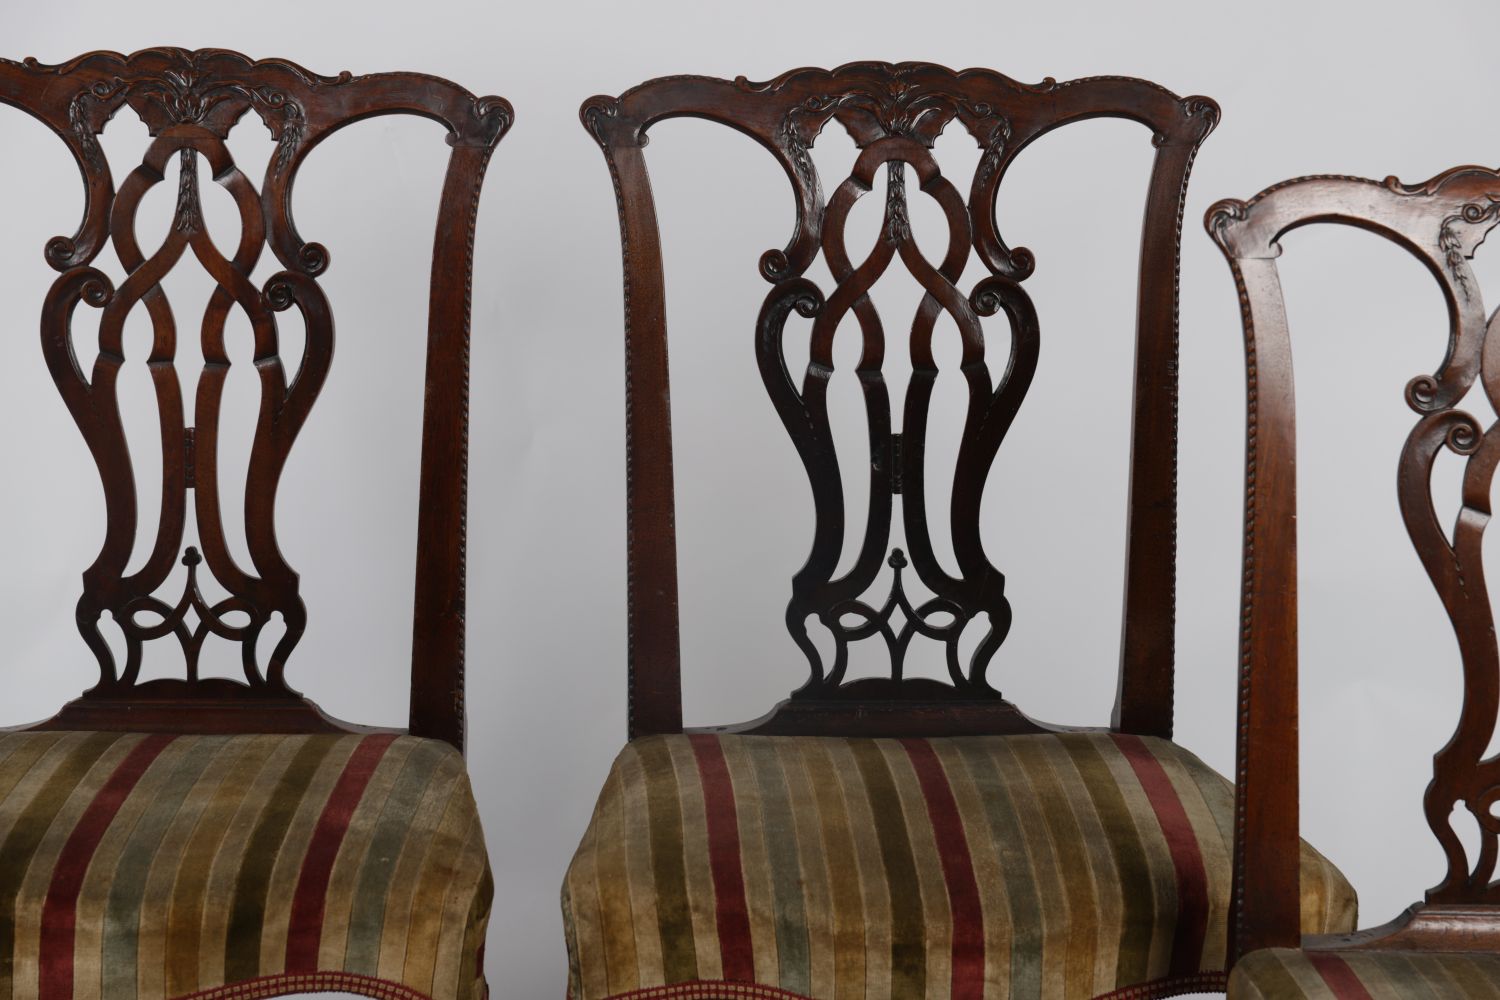 SET 4 18TH-CENTURY CHIPPENDALE CHAIRS - Image 3 of 3